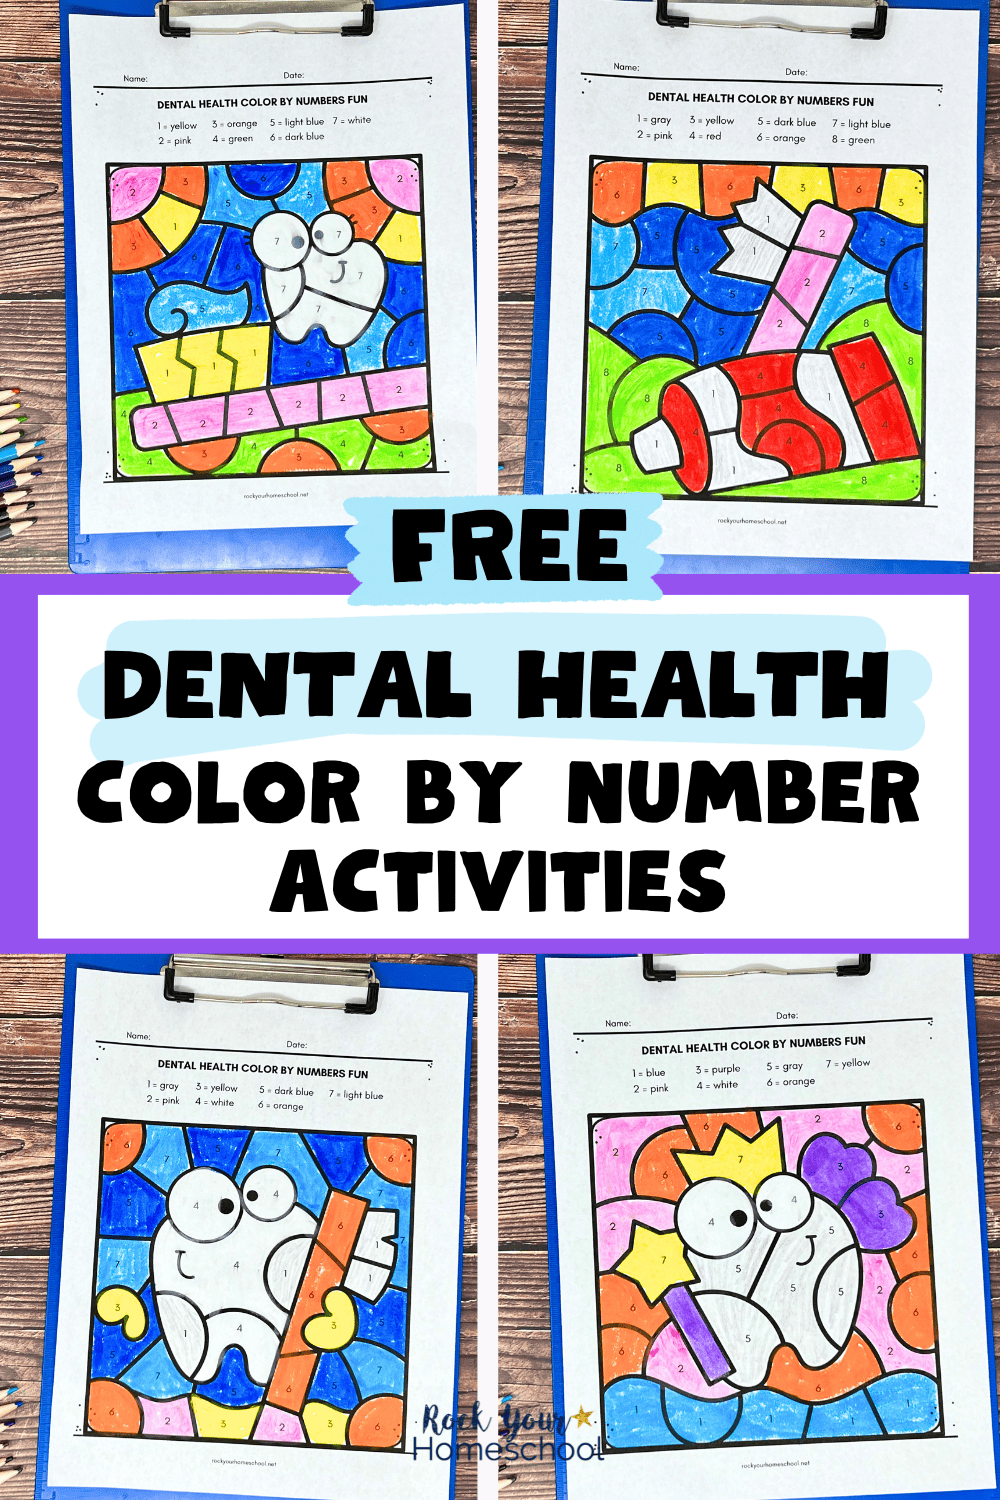 Dental Health Color by Number Pages for Kids (Free)